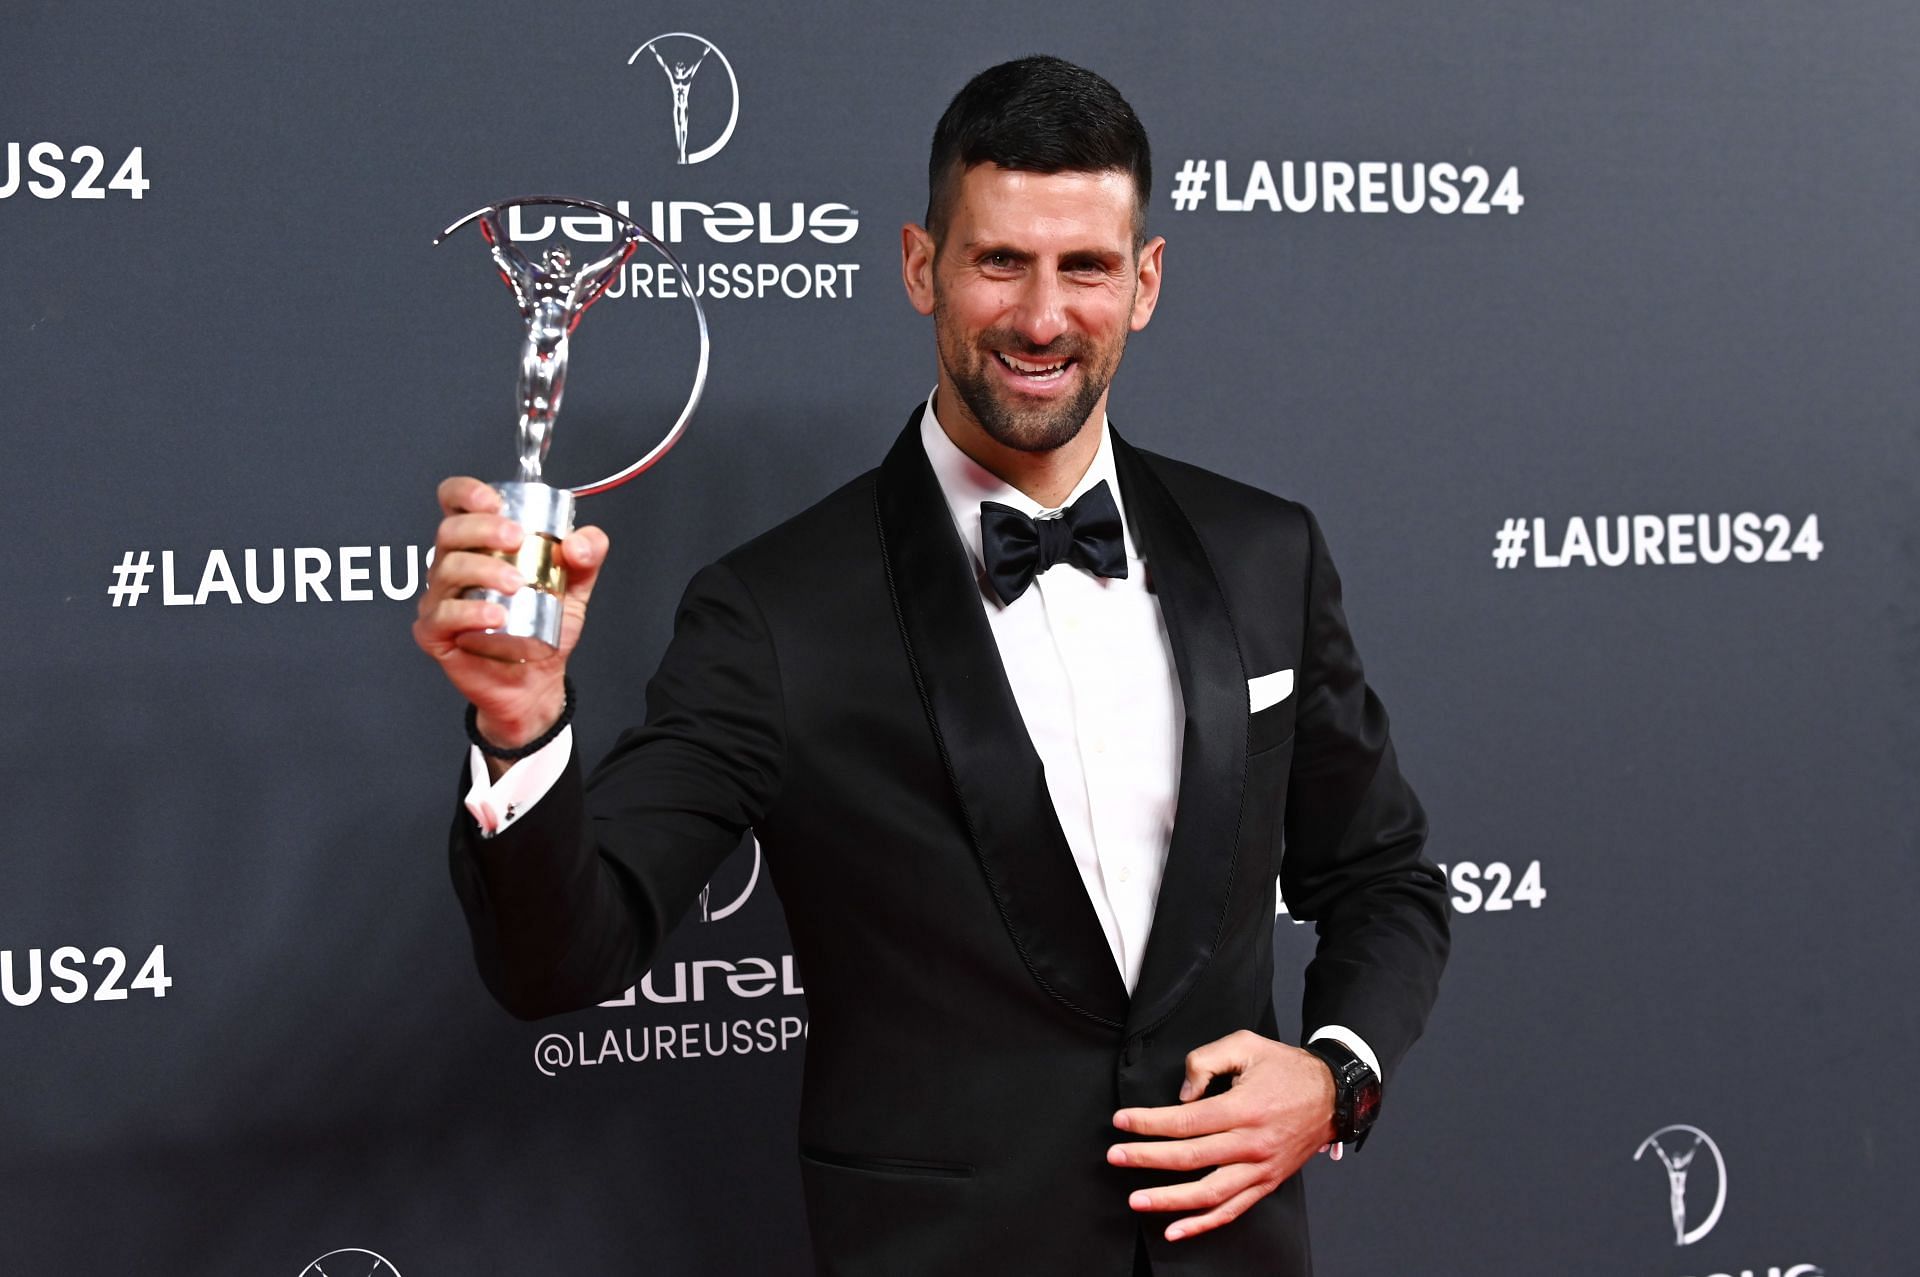 The Serb at the Laureus Awards